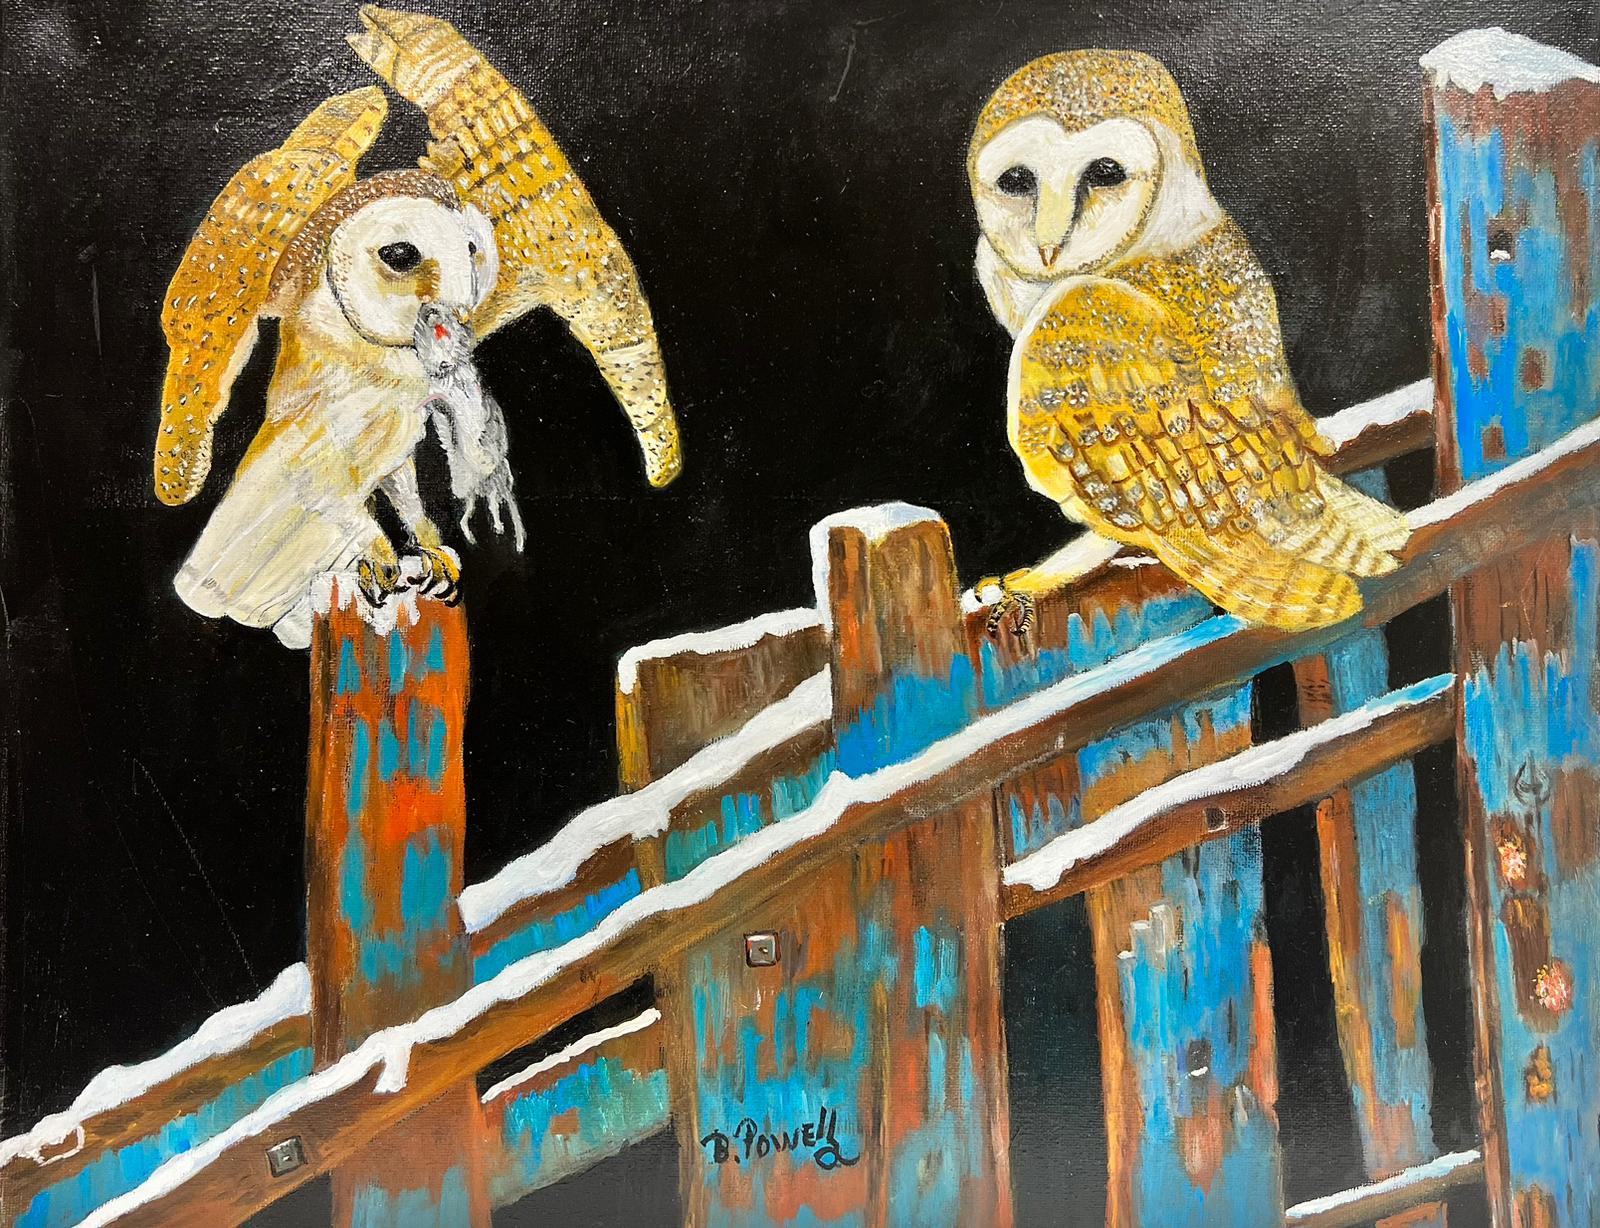 Ben Powell Landscape Painting - Contemporary British Acrylic Painting 2 Owls on old Wooden Fence